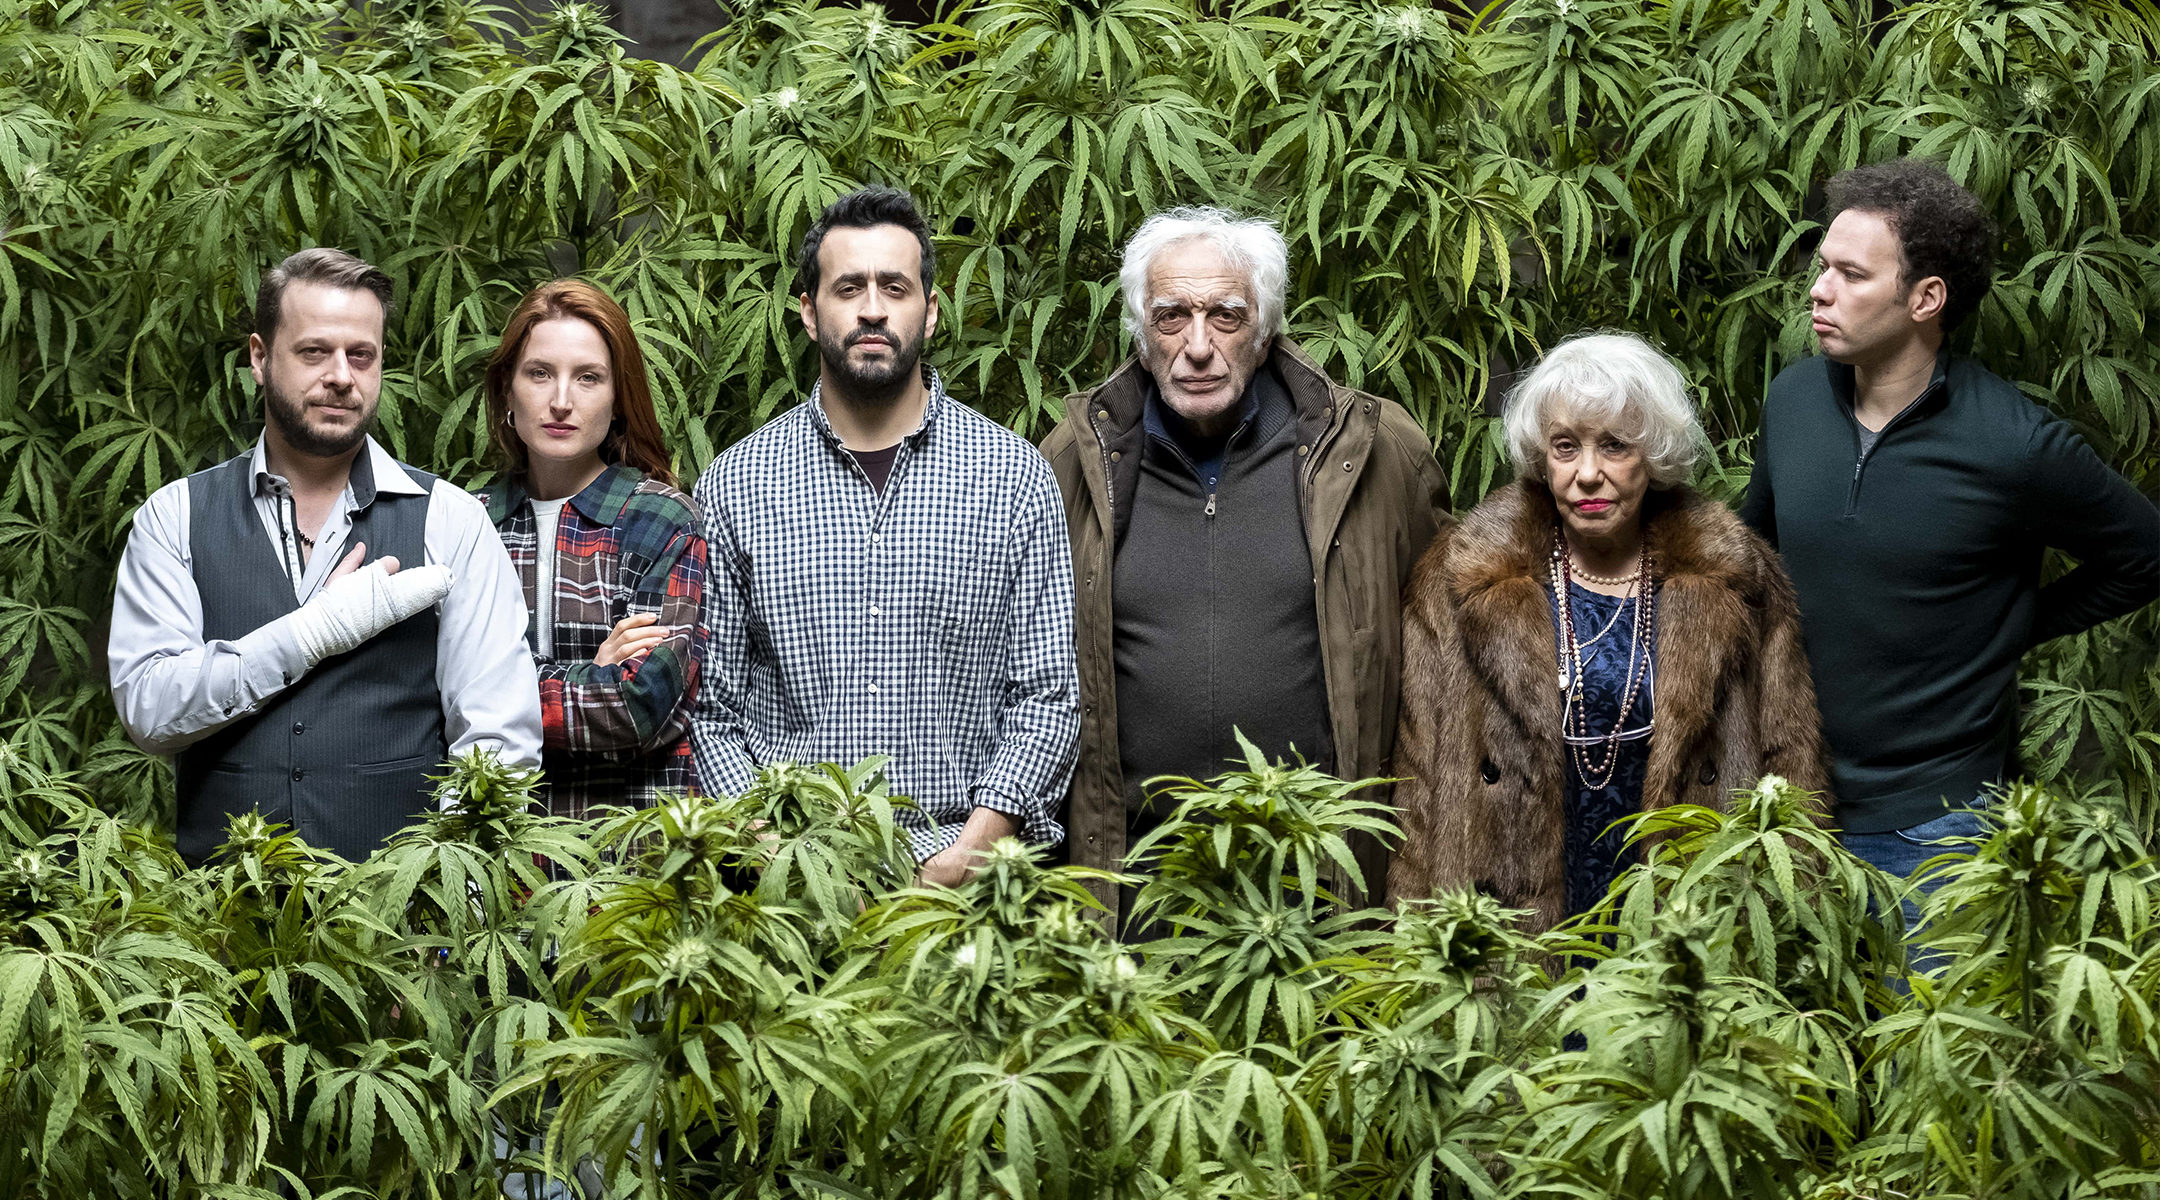 The new Netflix show 'Family Business' is a FrenchJewish version of